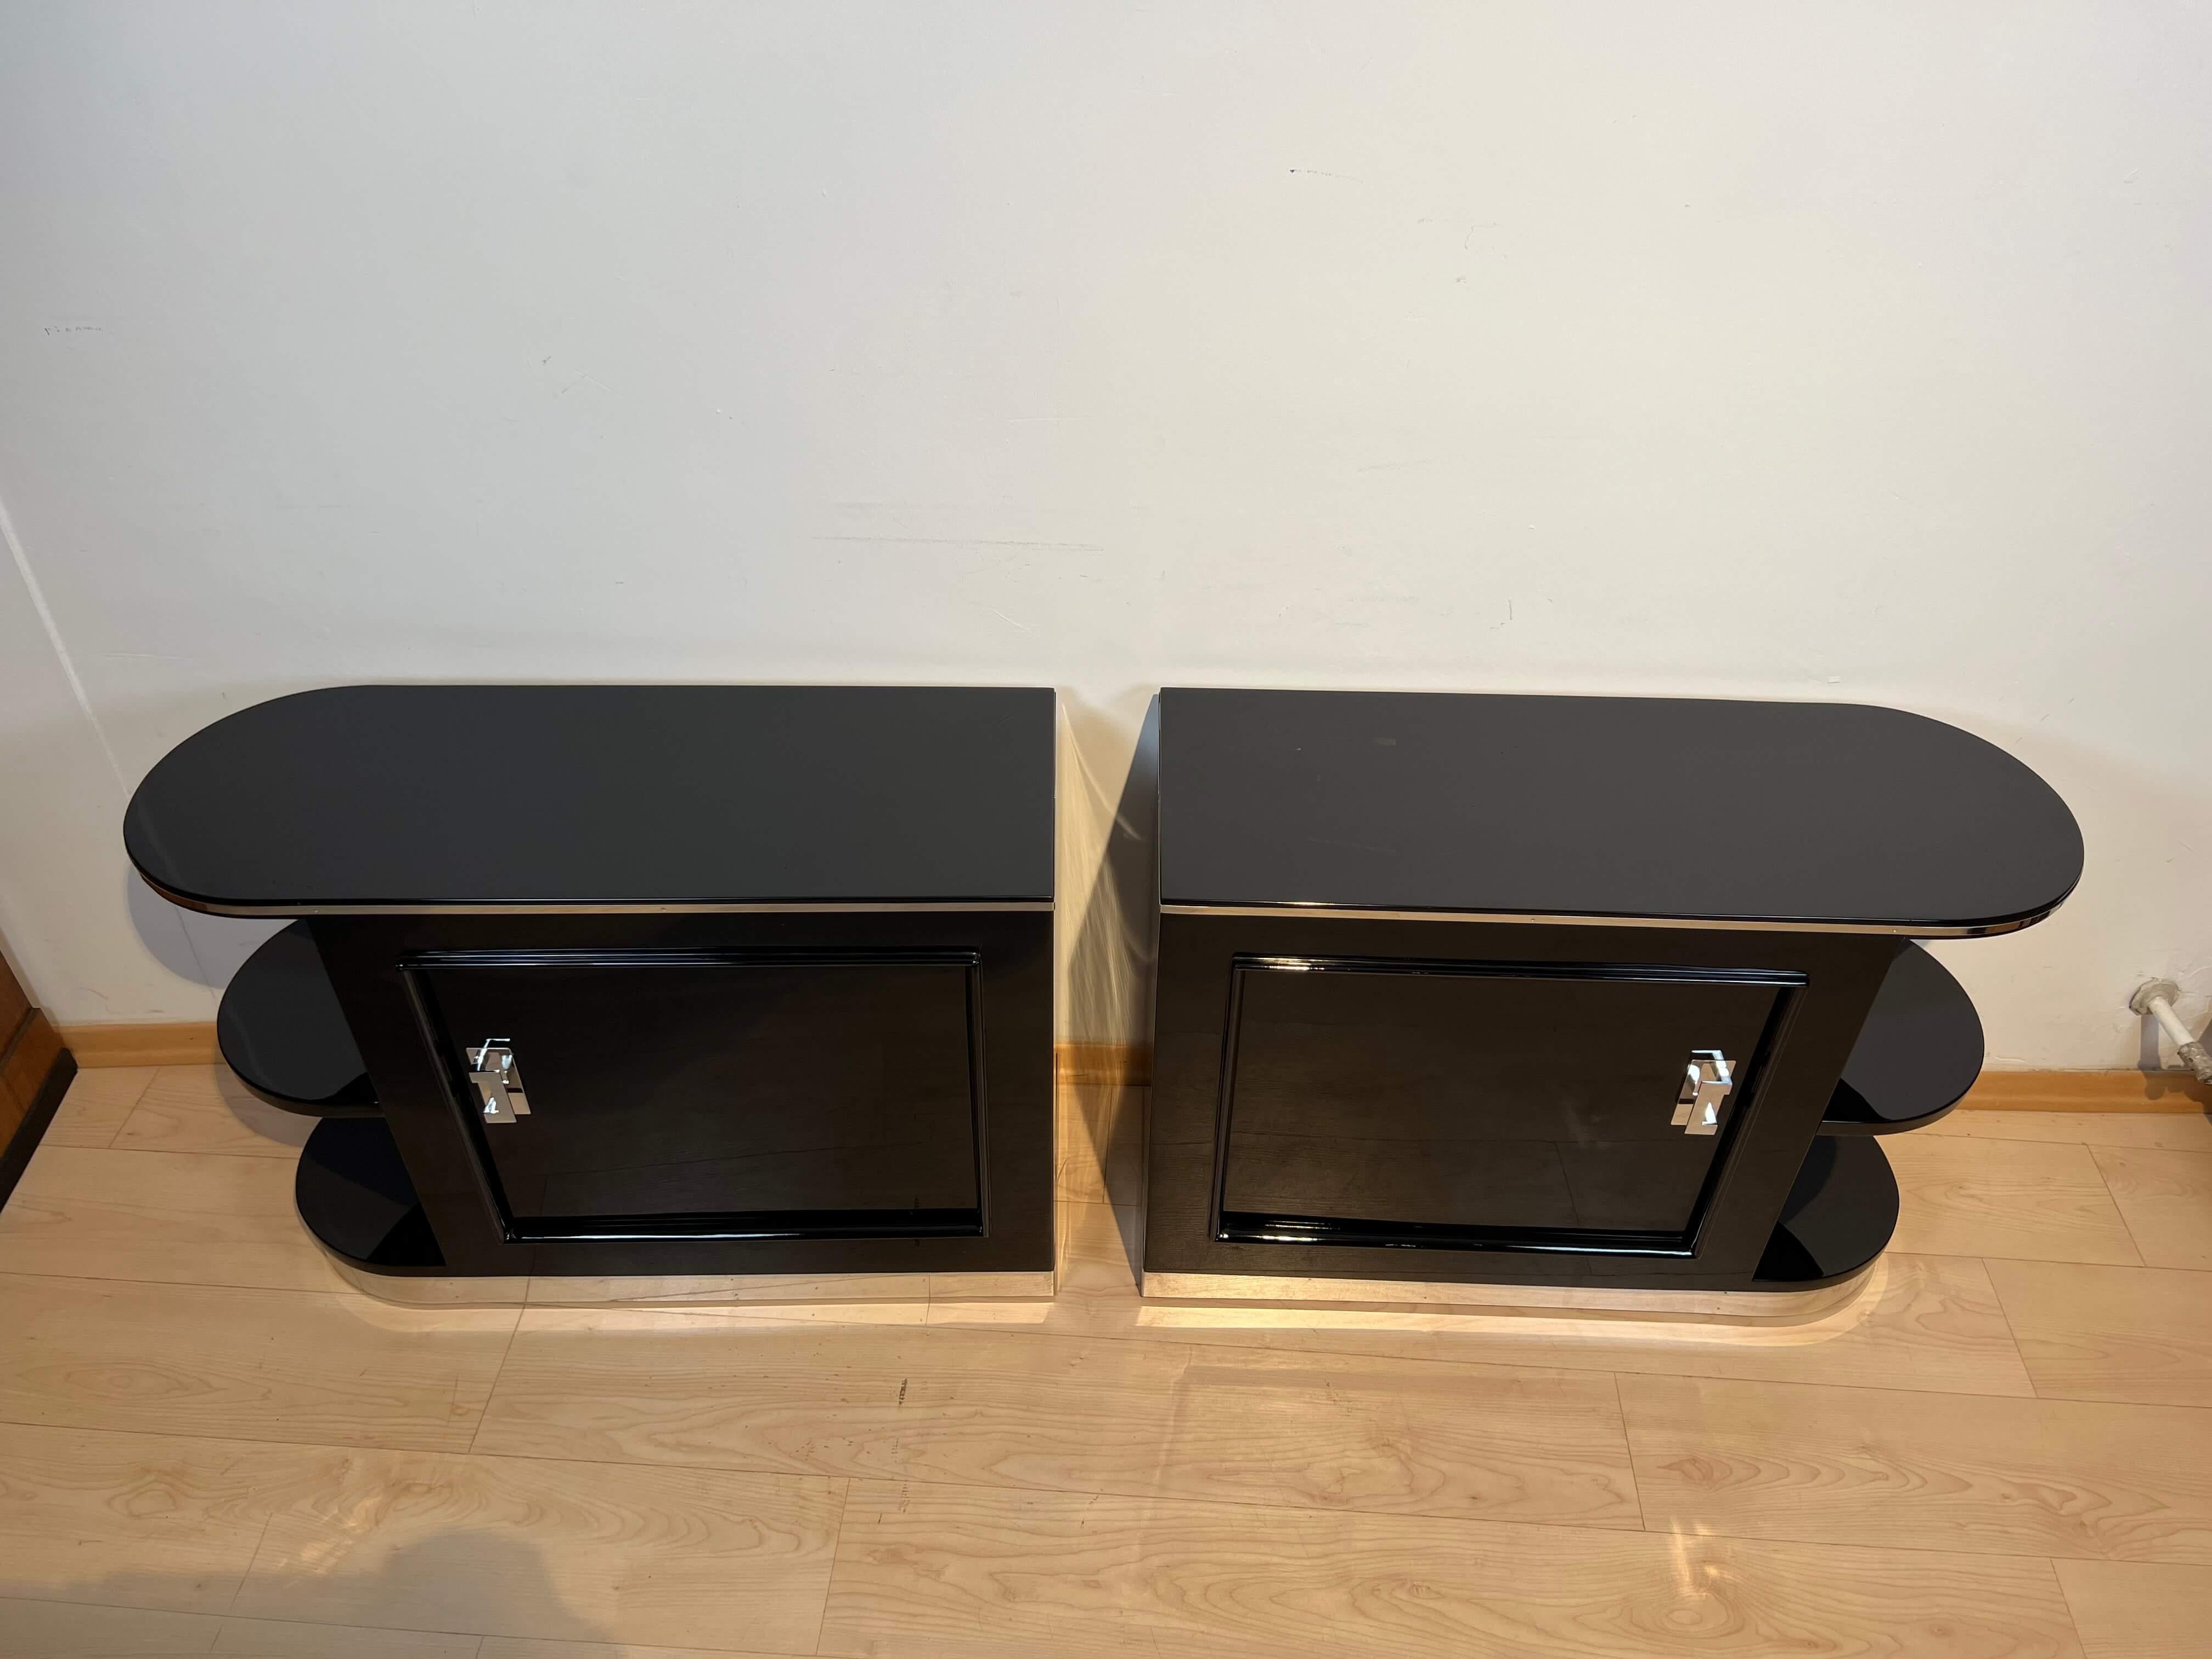 Lacquered Pair of Art Deco Cabinets/Nightstands, Black Lacquer, Chrome, France circa 1930